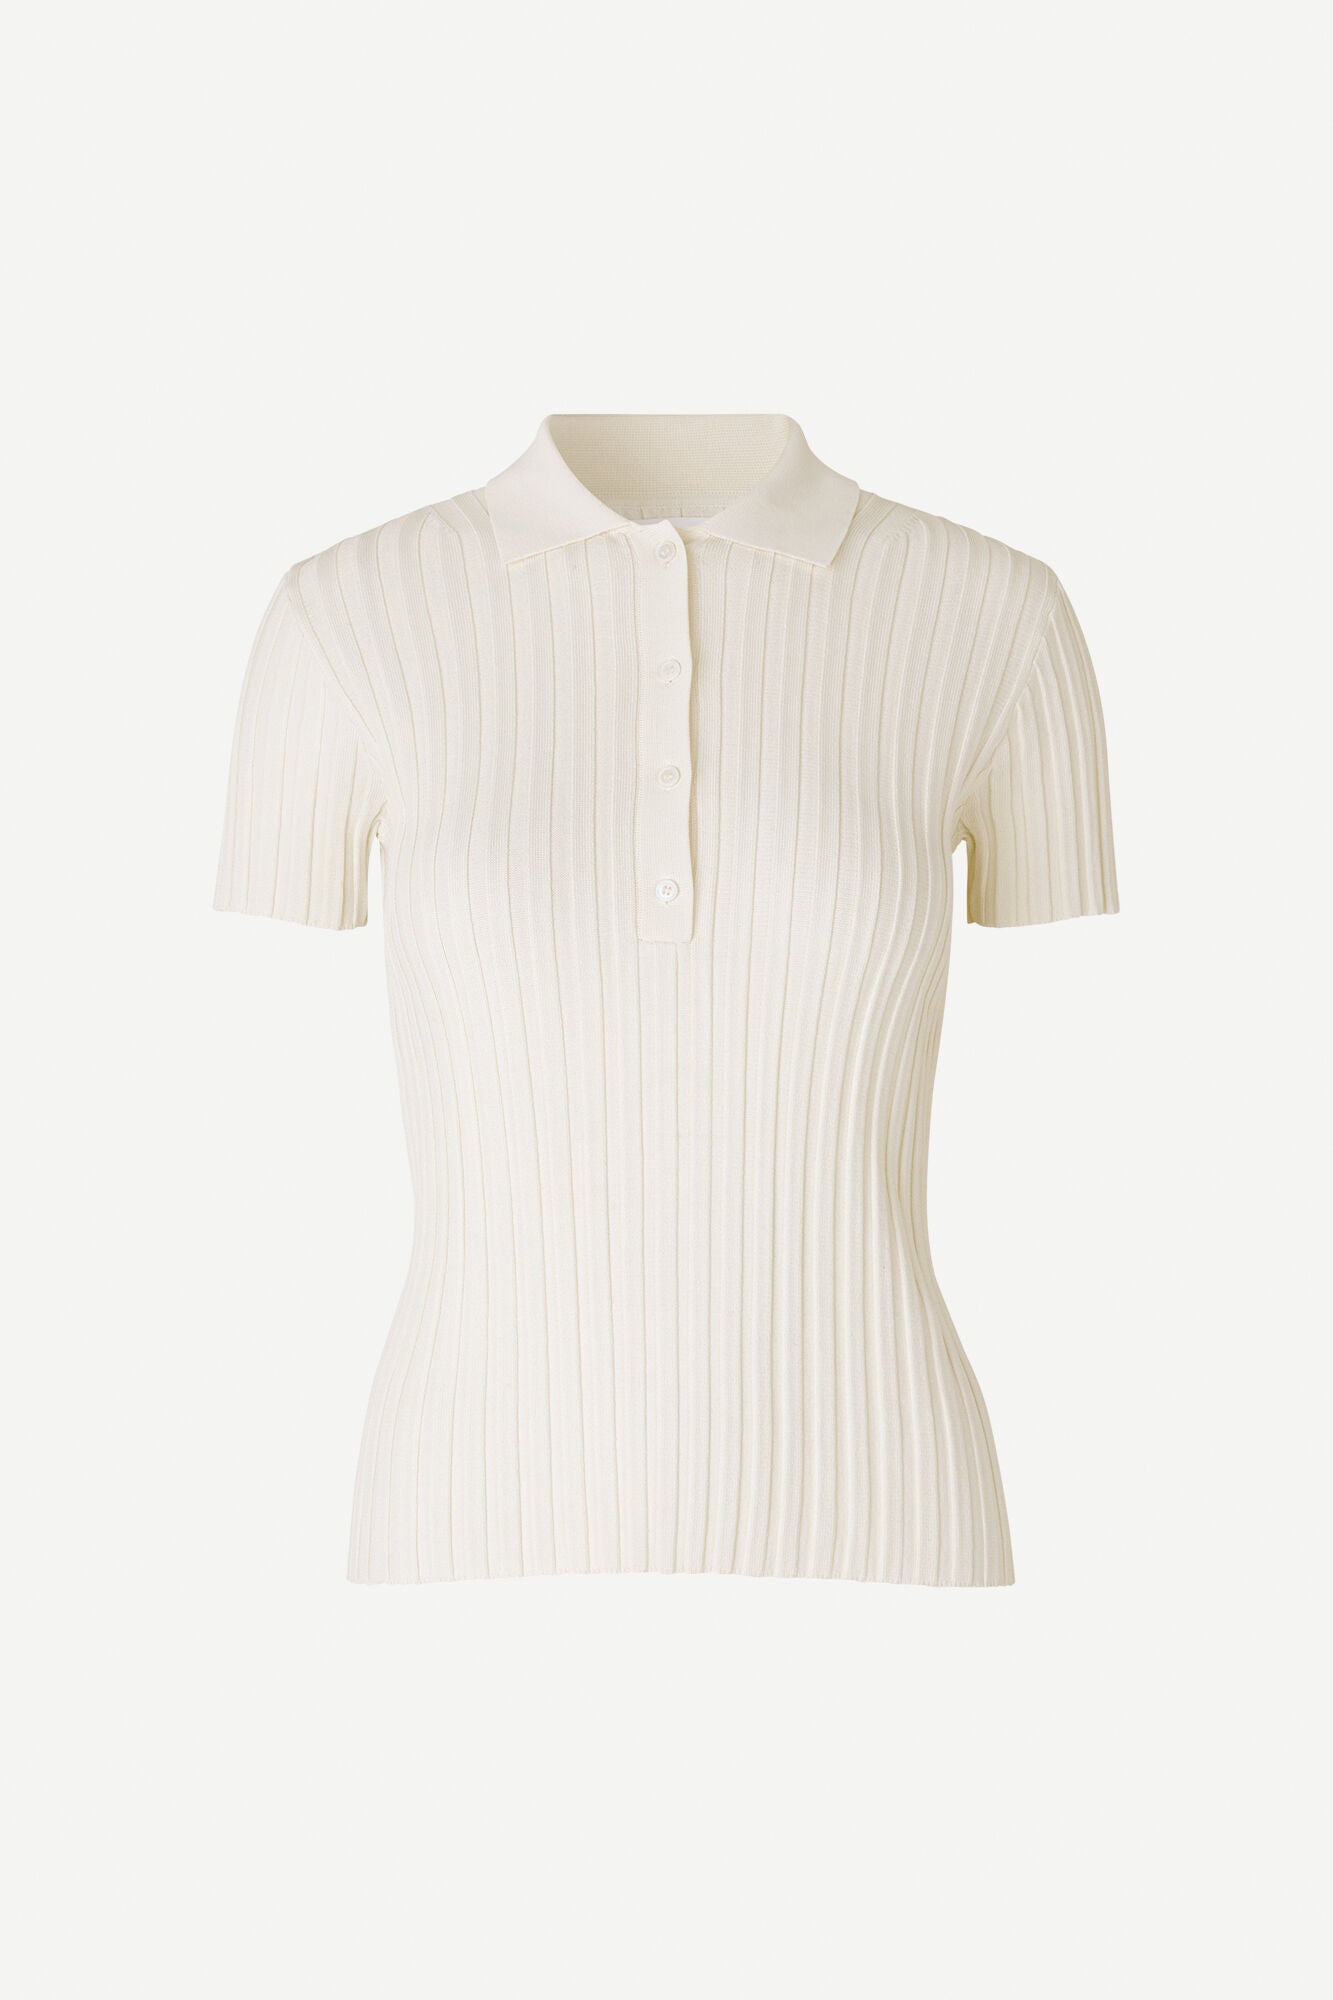 POLONECK KNITTED TOP IN IVORY WHITE